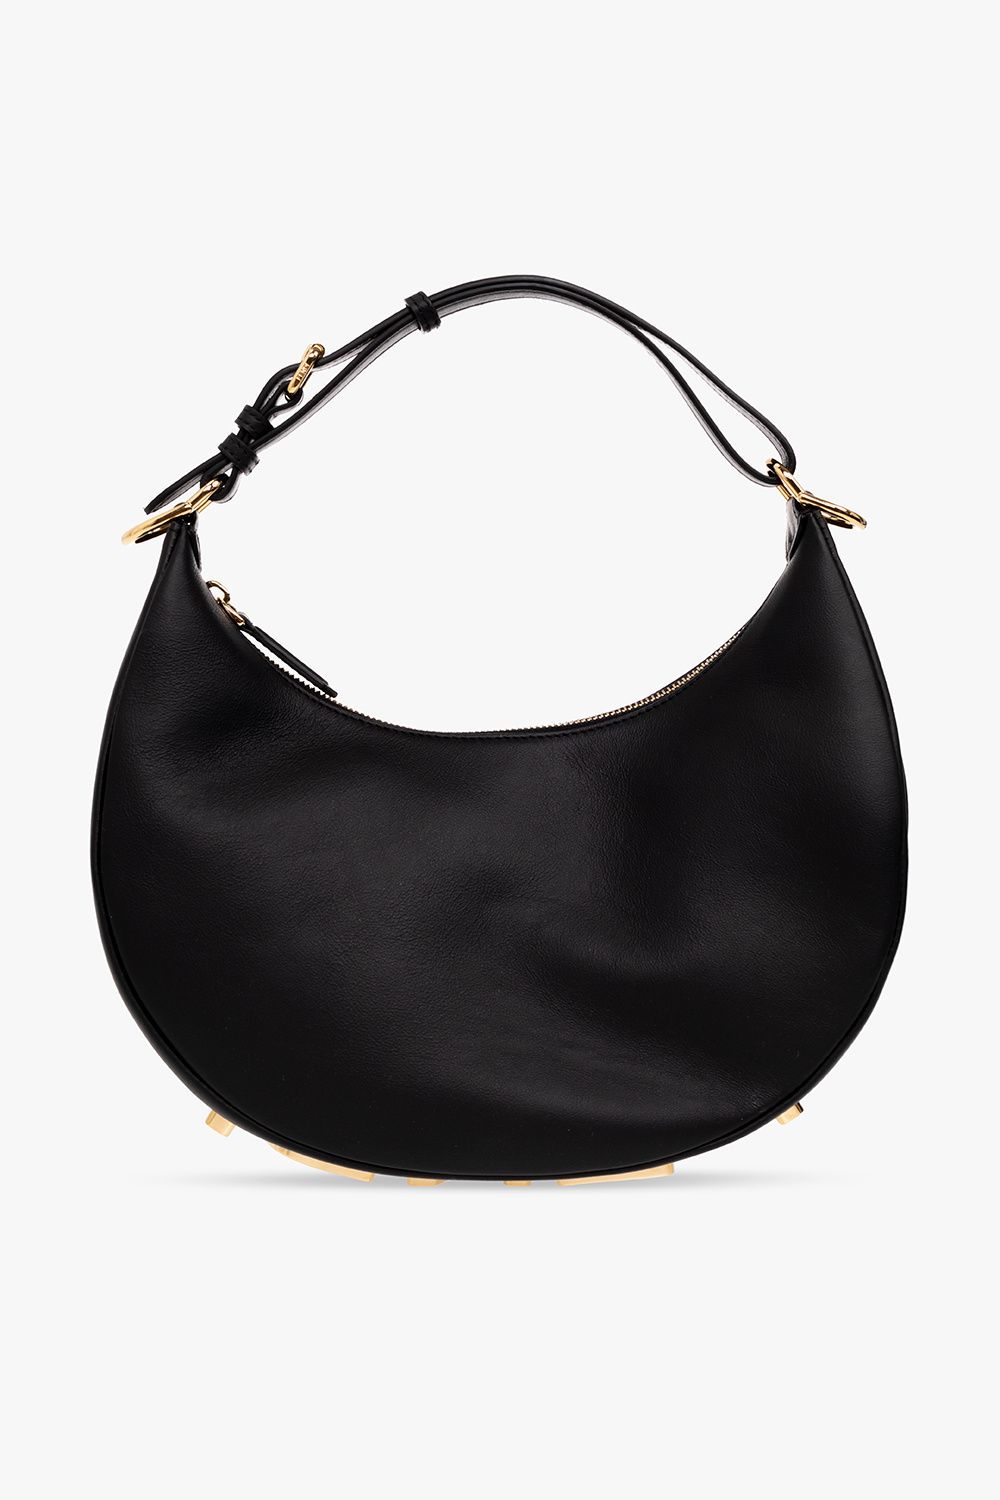 Fendigraphy Small - Black leather bag